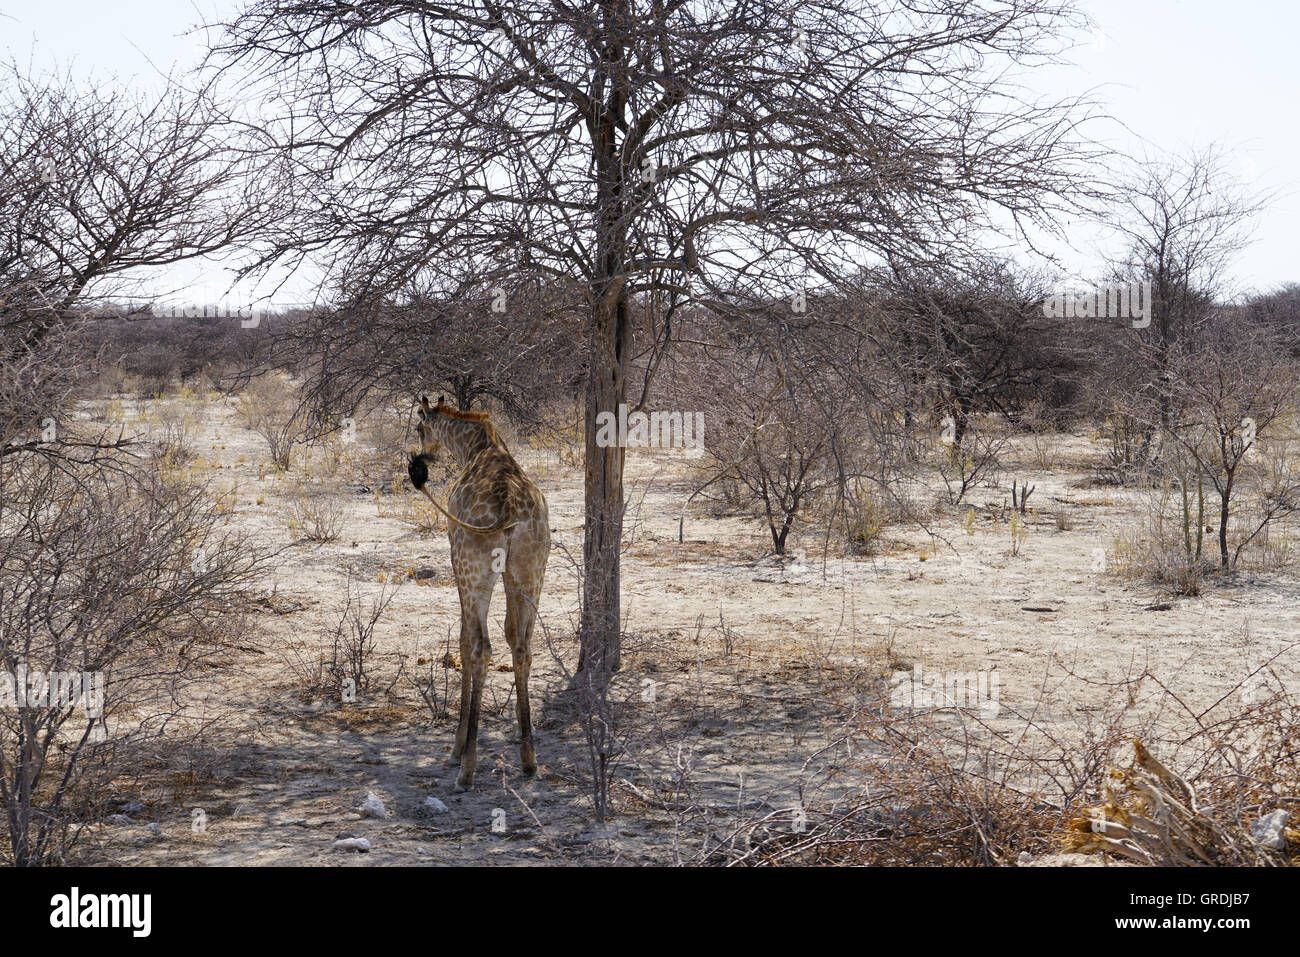 Giraffe In The Bush, Namibia, Tickling In The Face With Her Tail Stock Photo